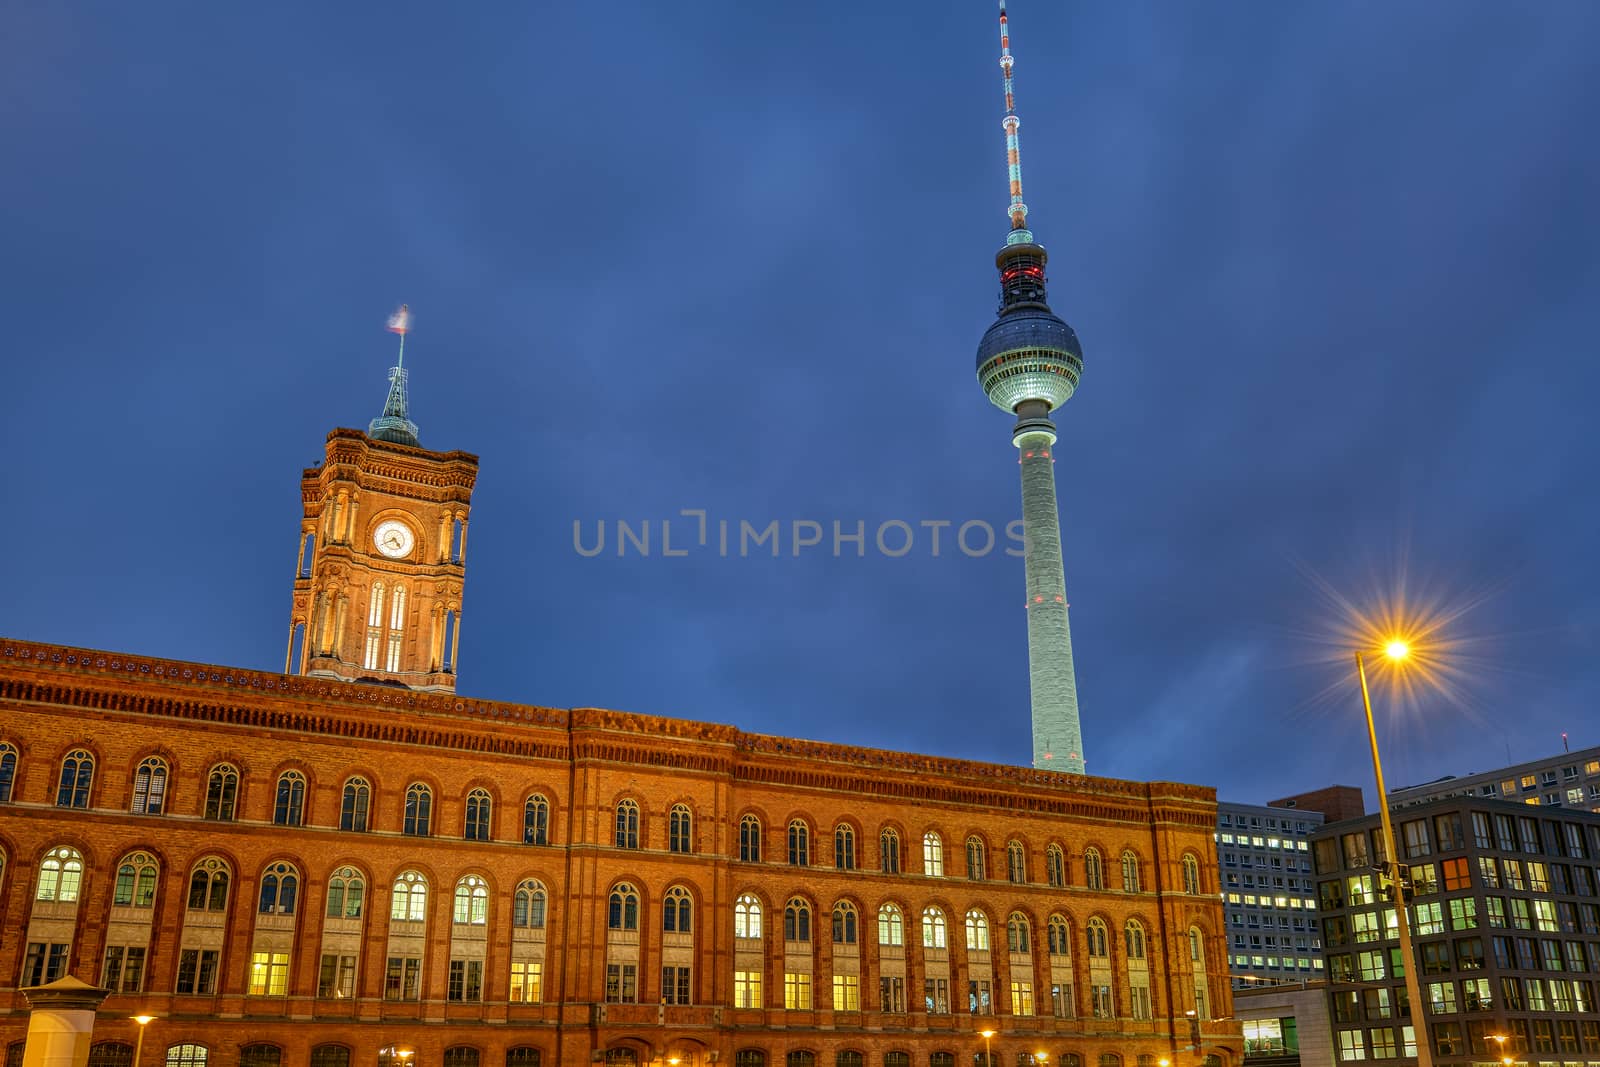 The red city hall and the famous Television Tower in Berlin at night